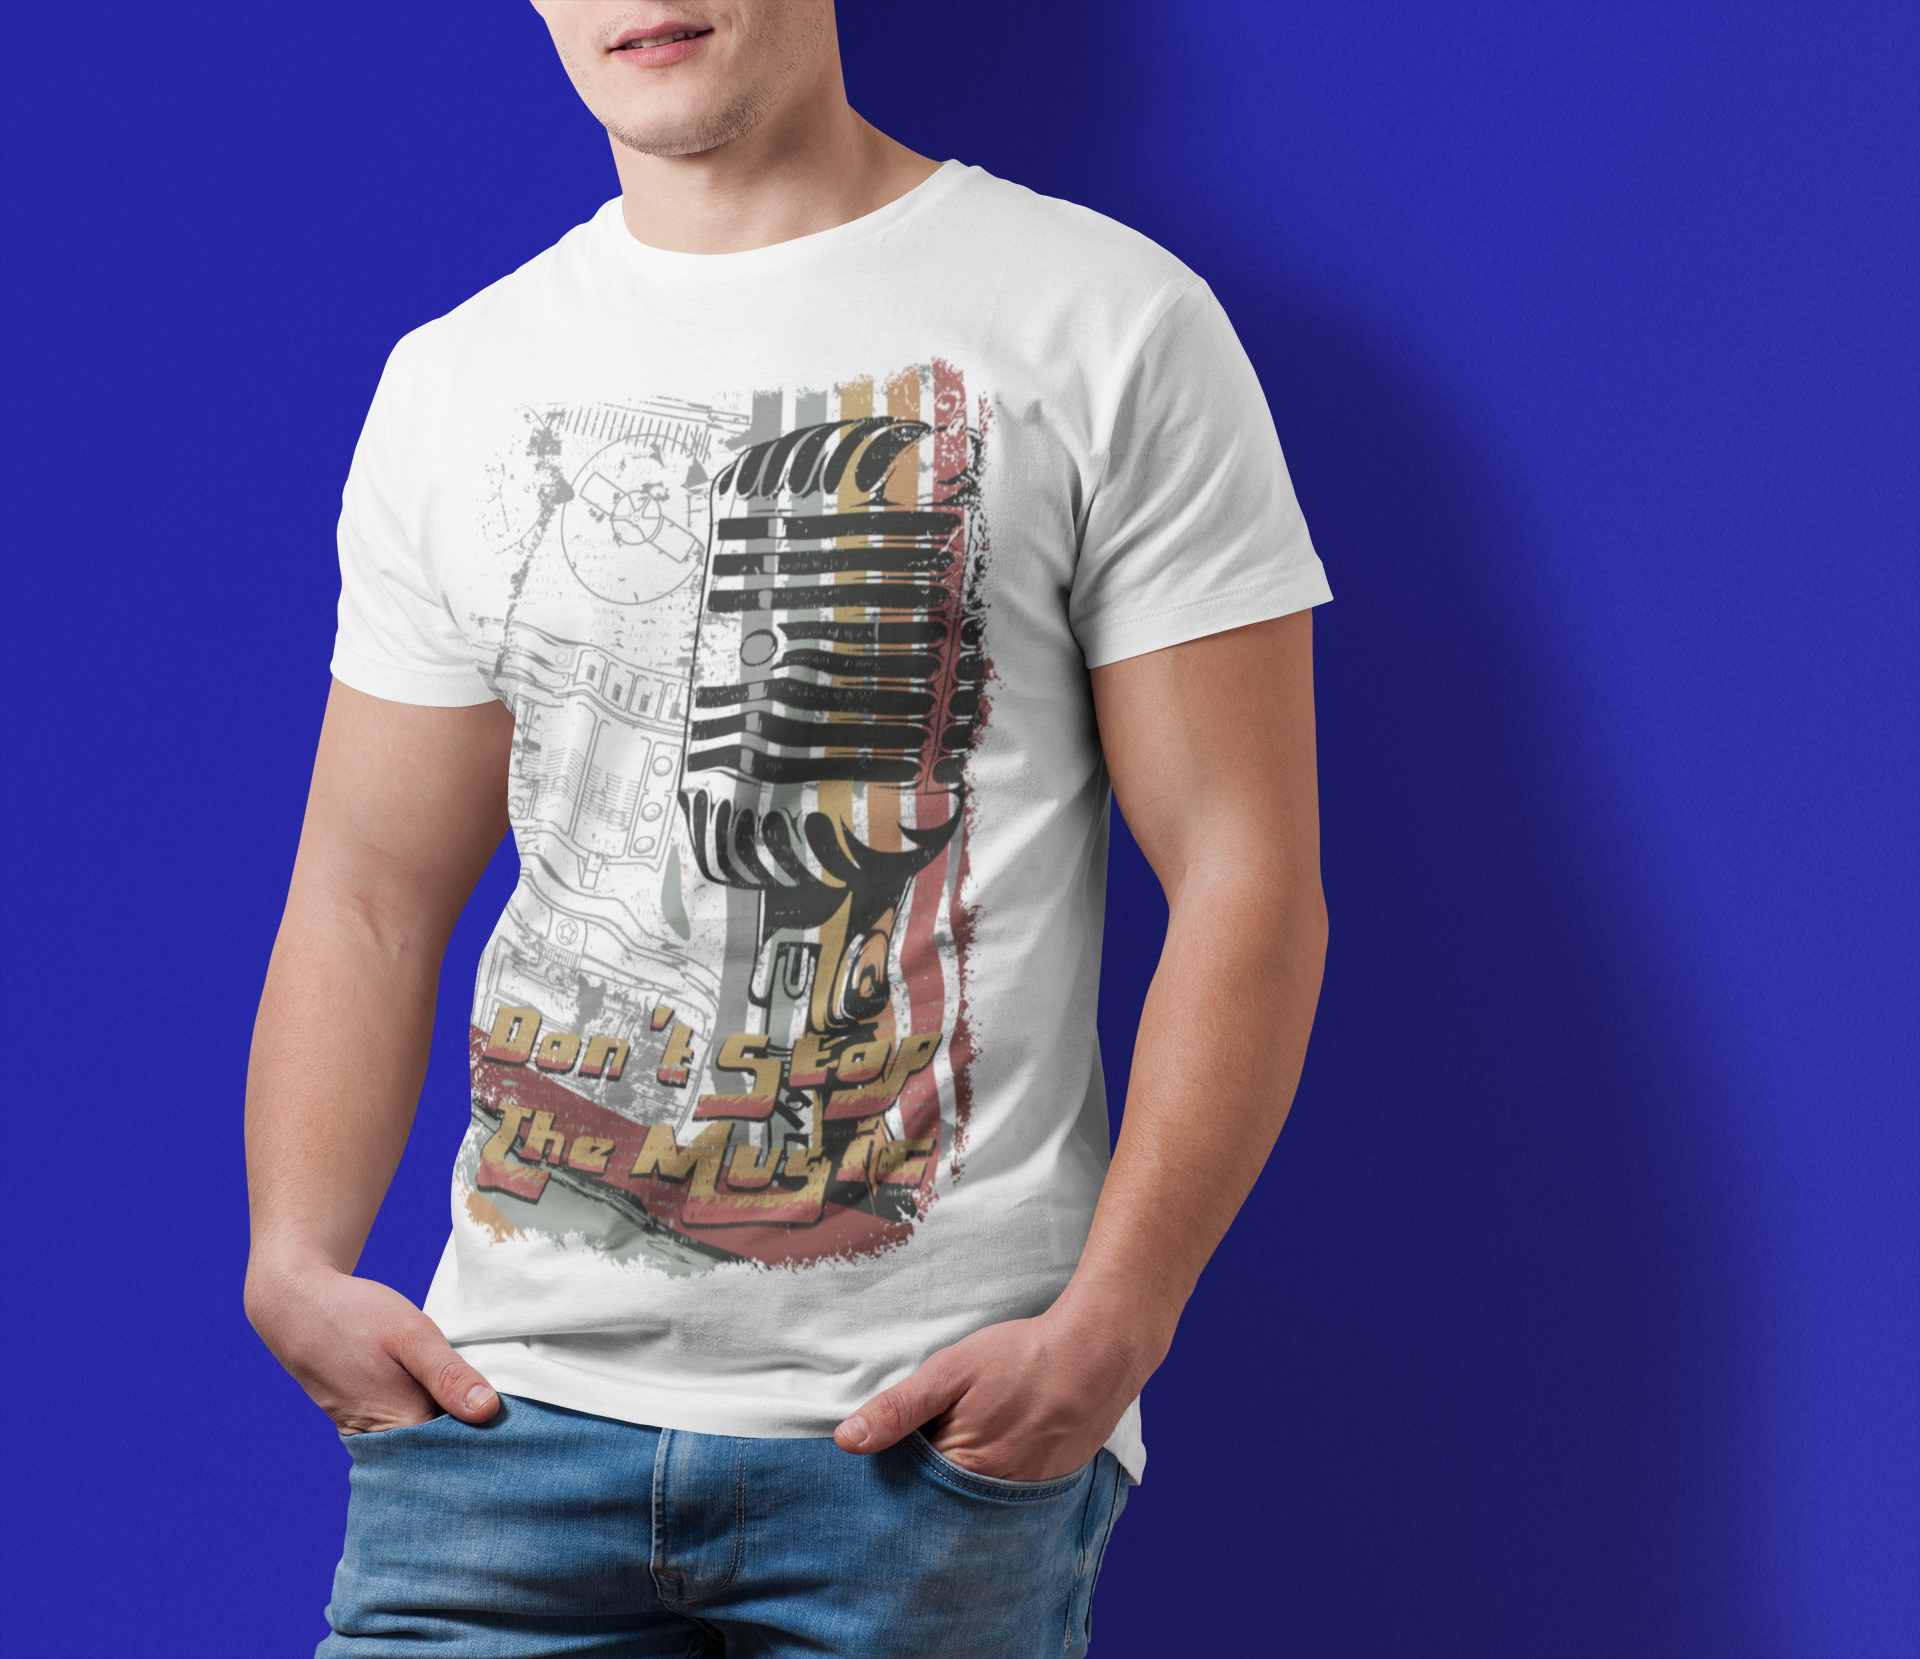 Men's Cotton Crew Tee - DON'T STOP THE MUSIC